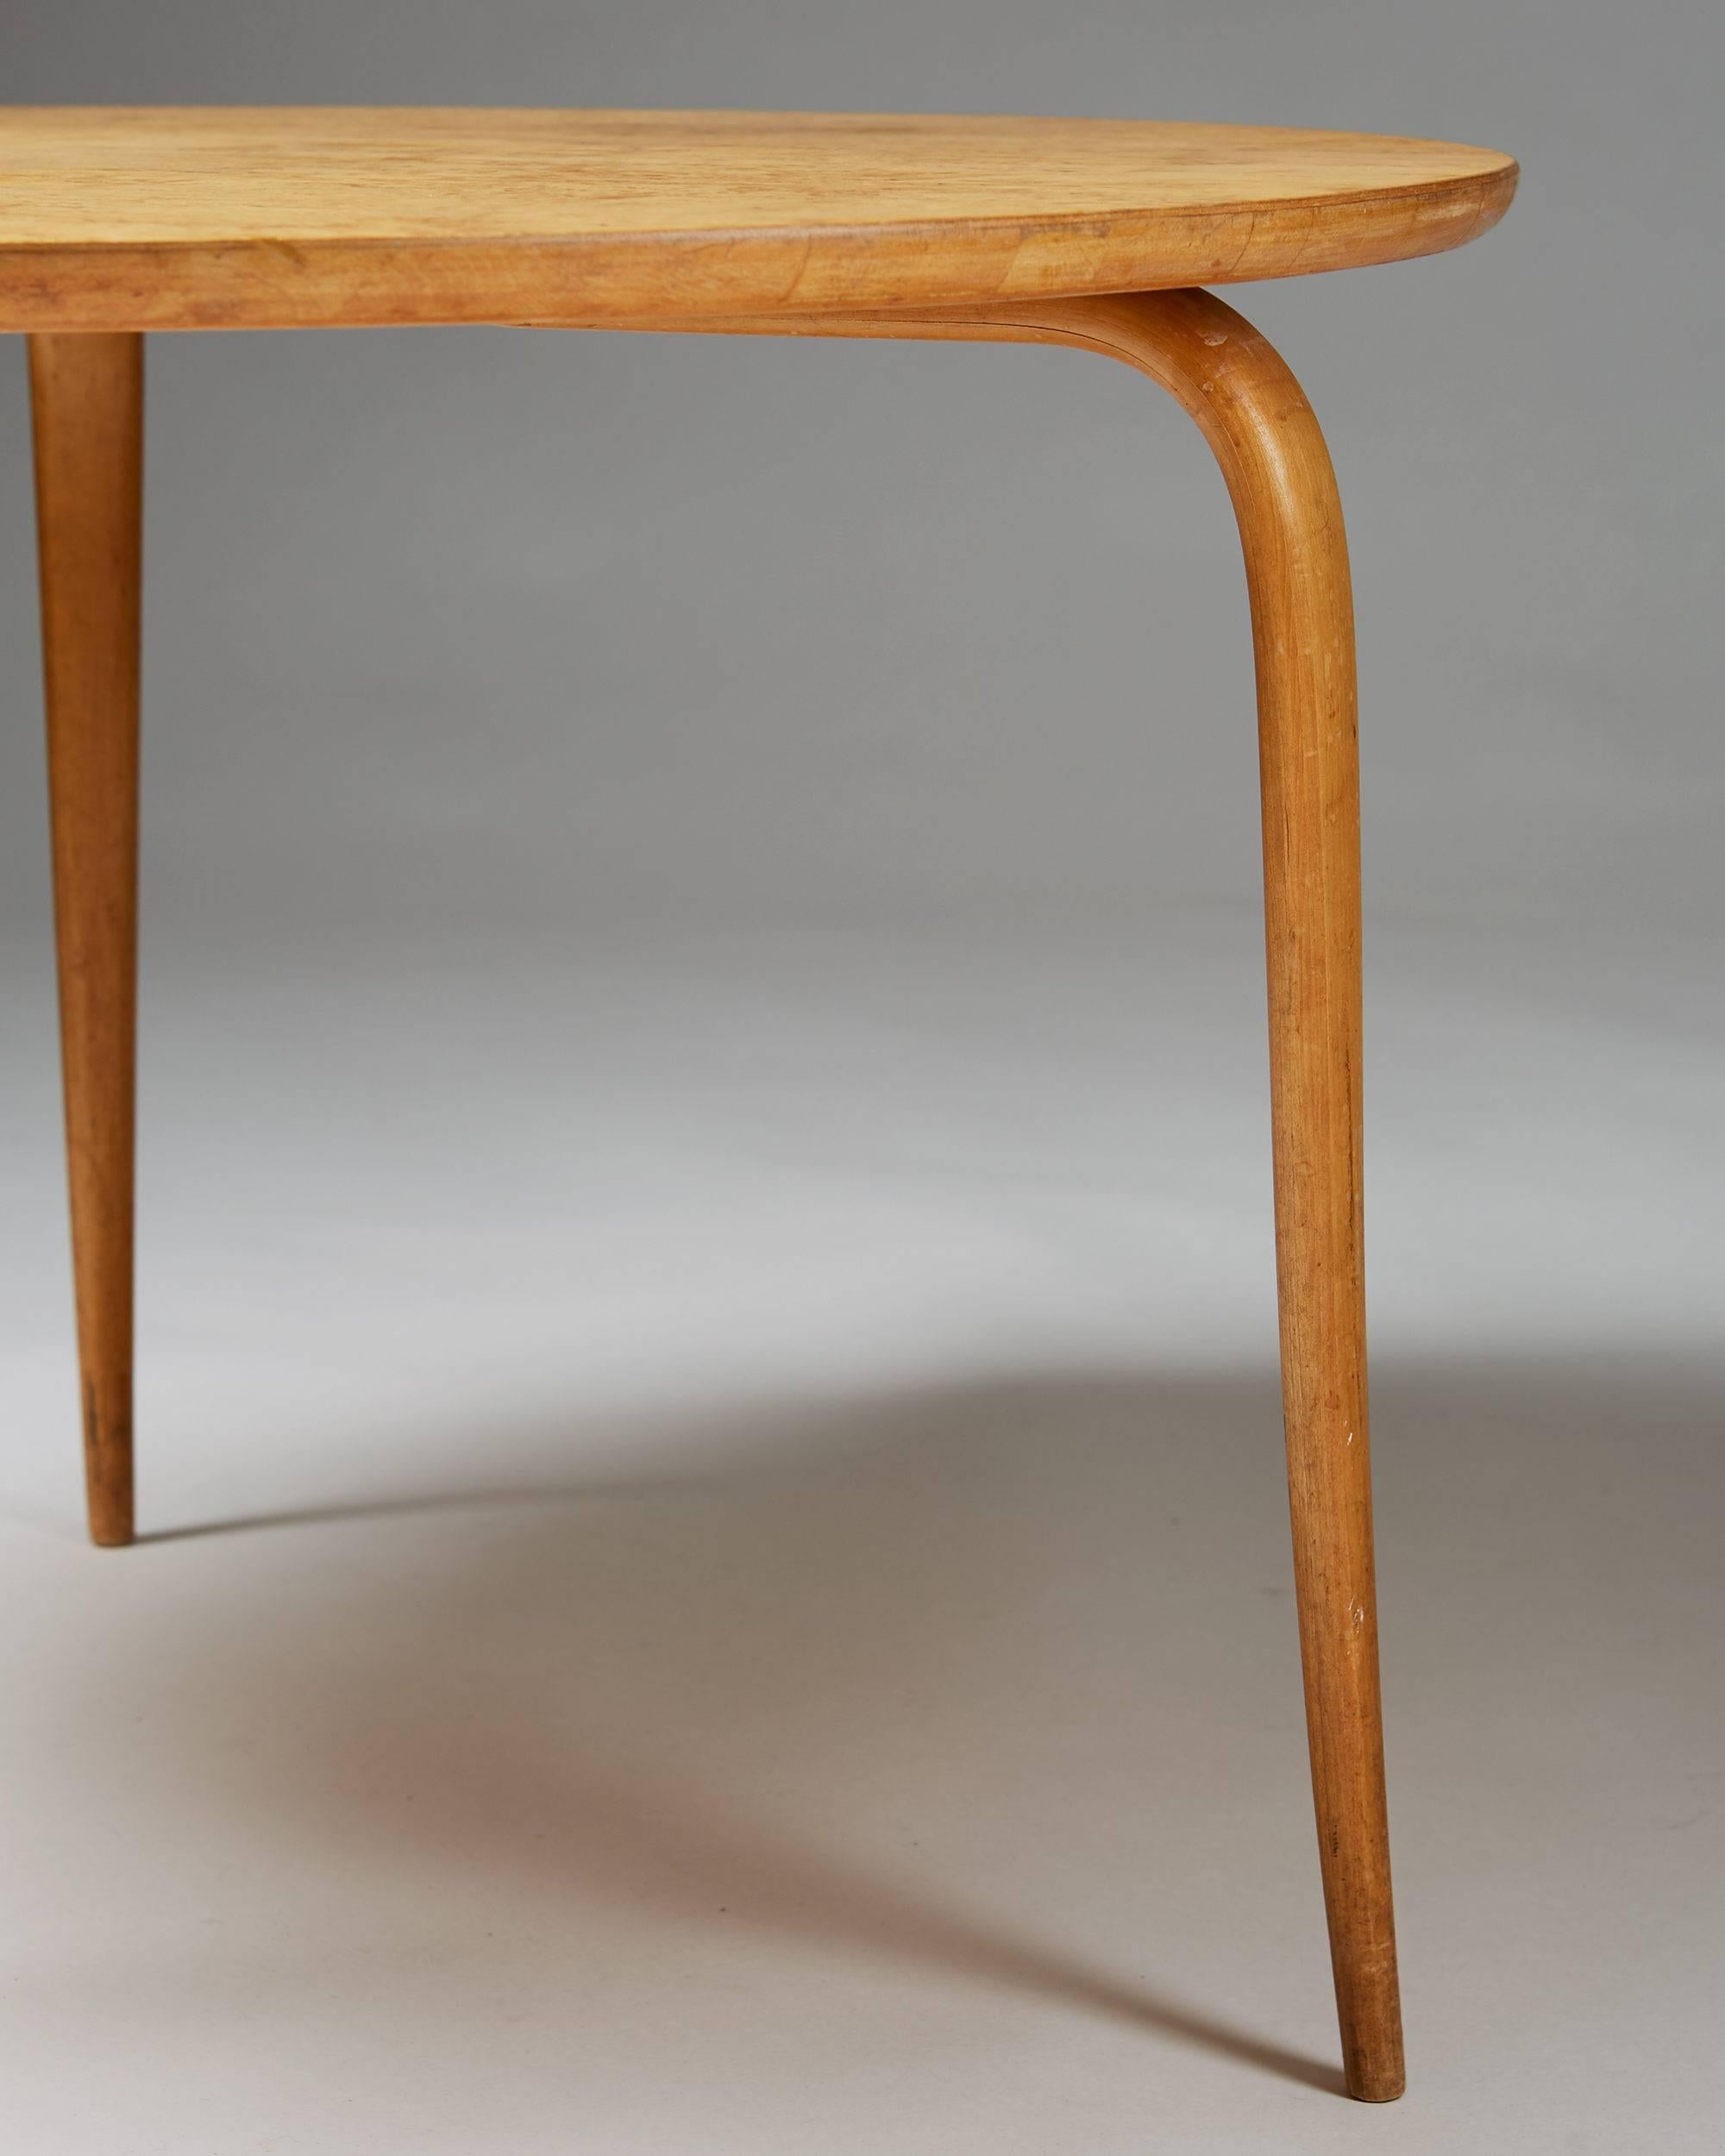 Occasional table Annika designed by Bruno Mathsson, Sweden, 1936.

Birch and Karelian birch.

Measures: H: 51 cm / 20''
D: 85 cm / 33 1/2''.